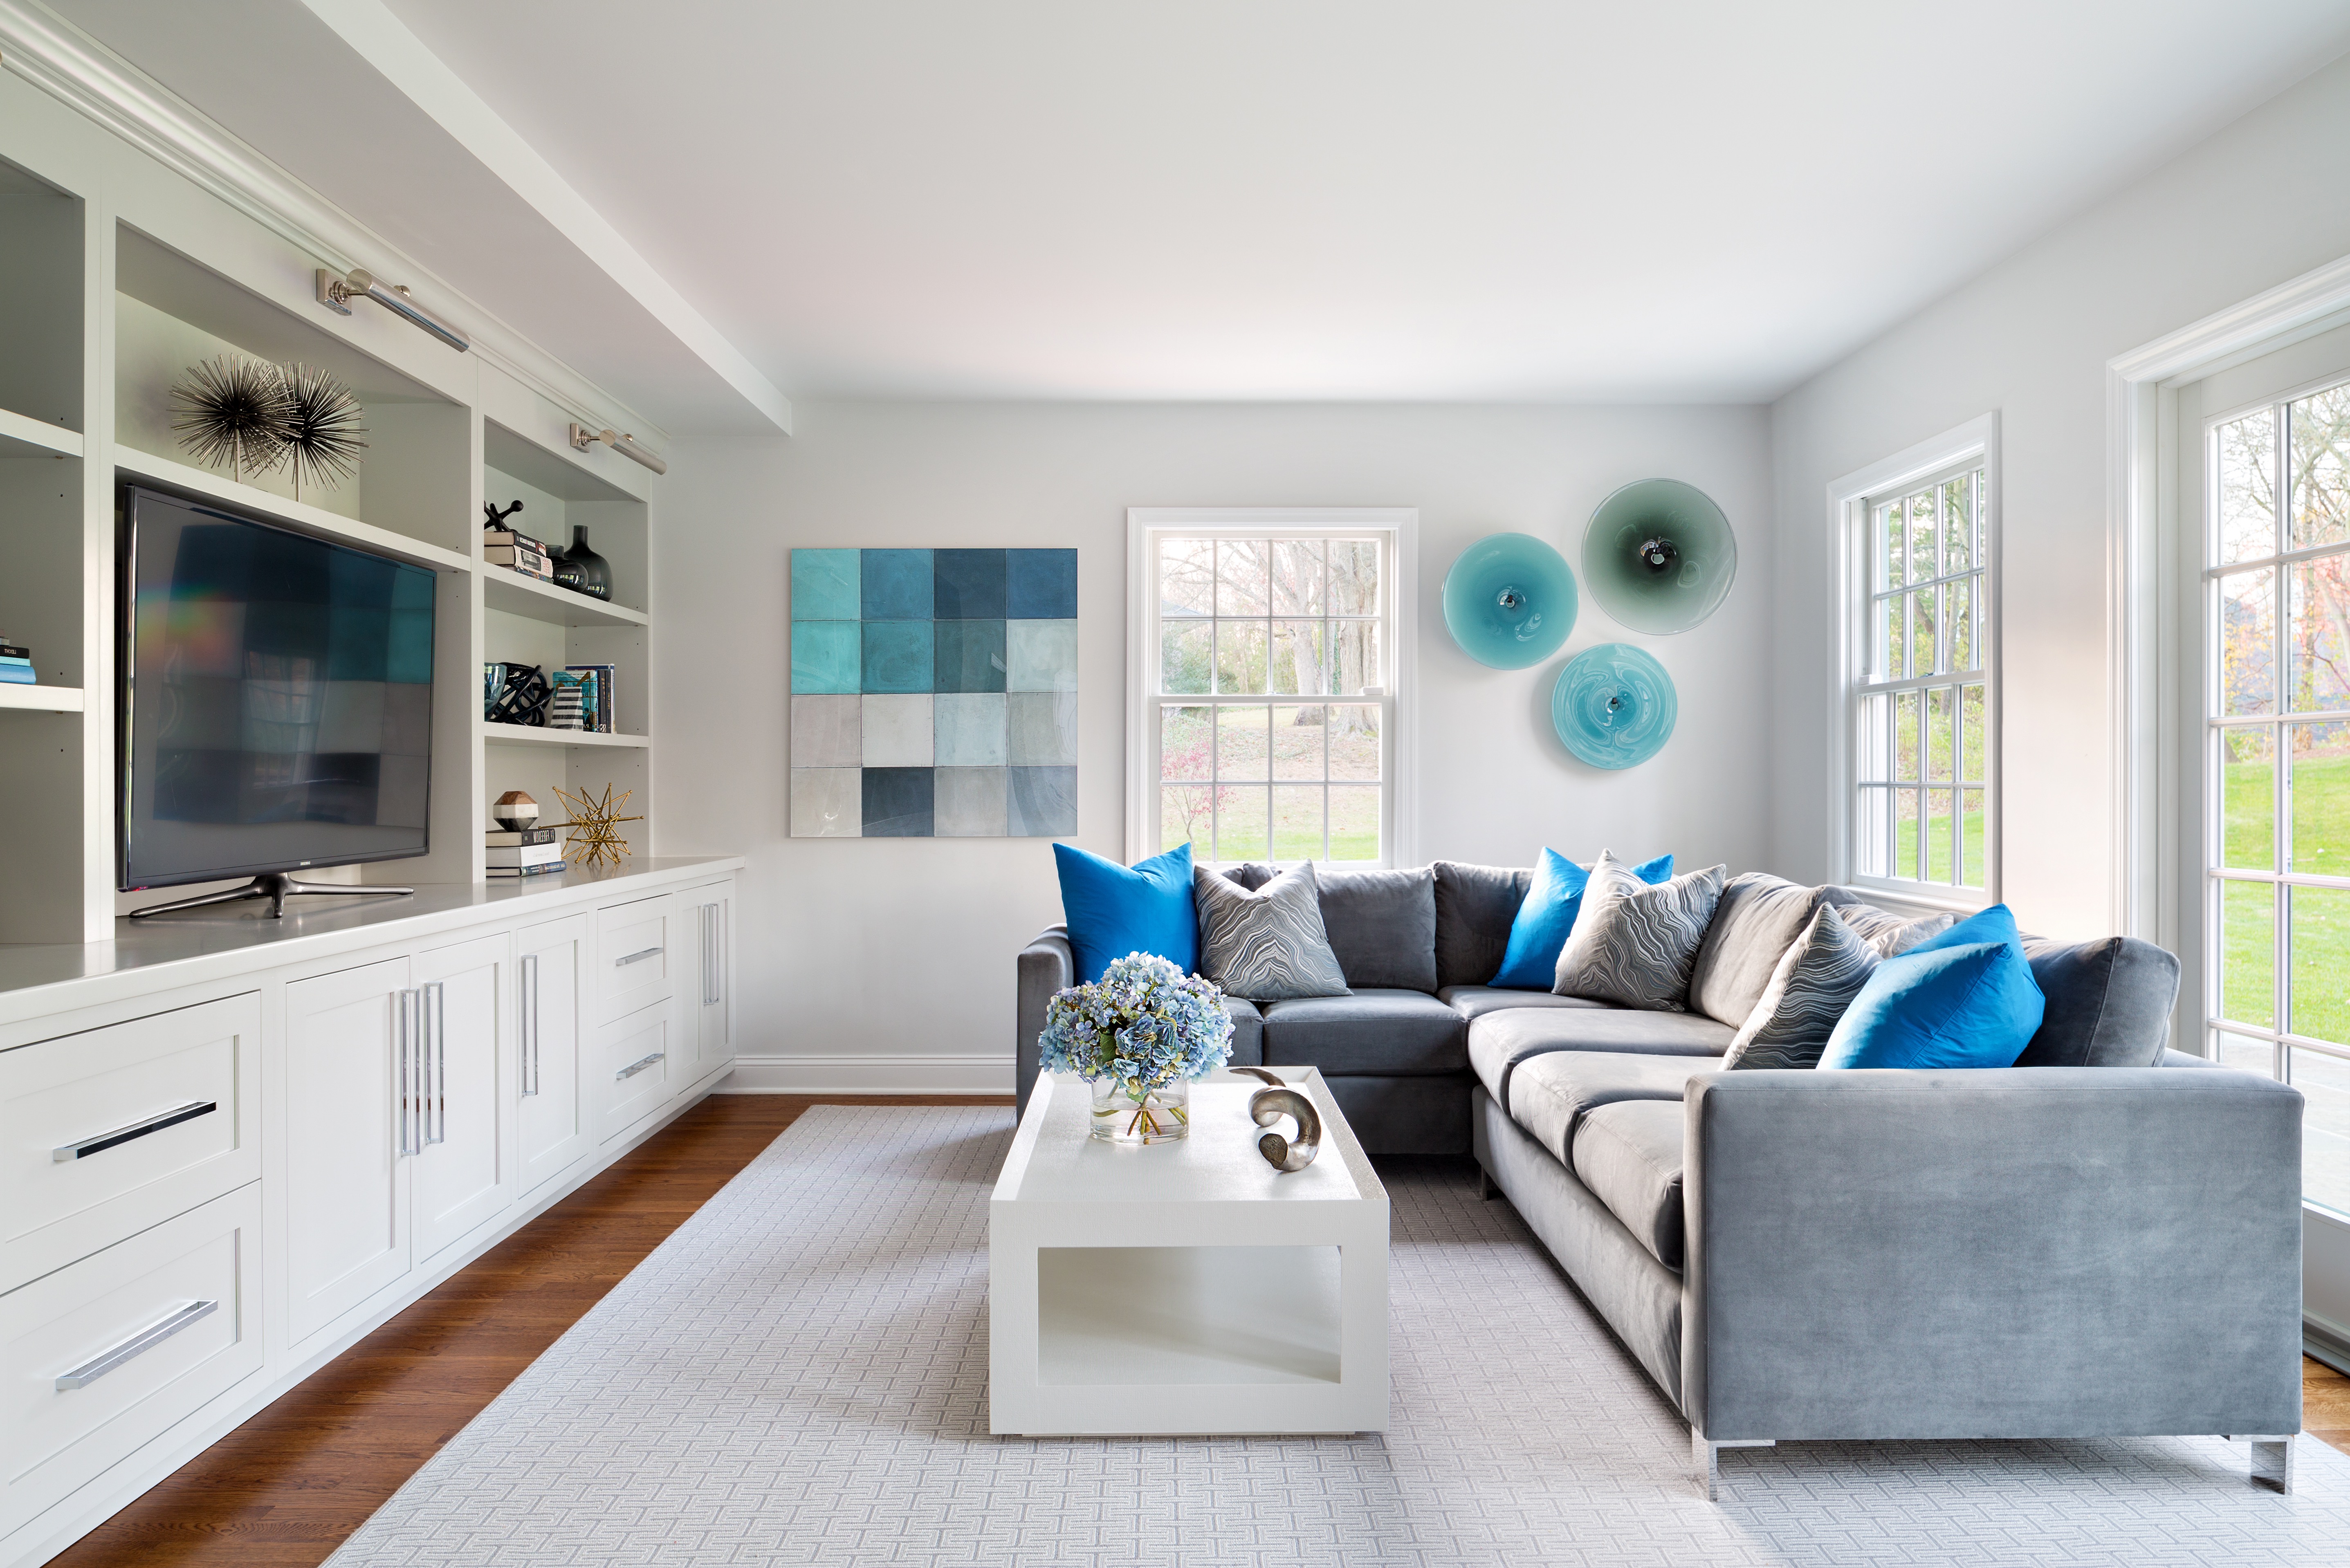 Living Room Decor: Designing A Home To Live In